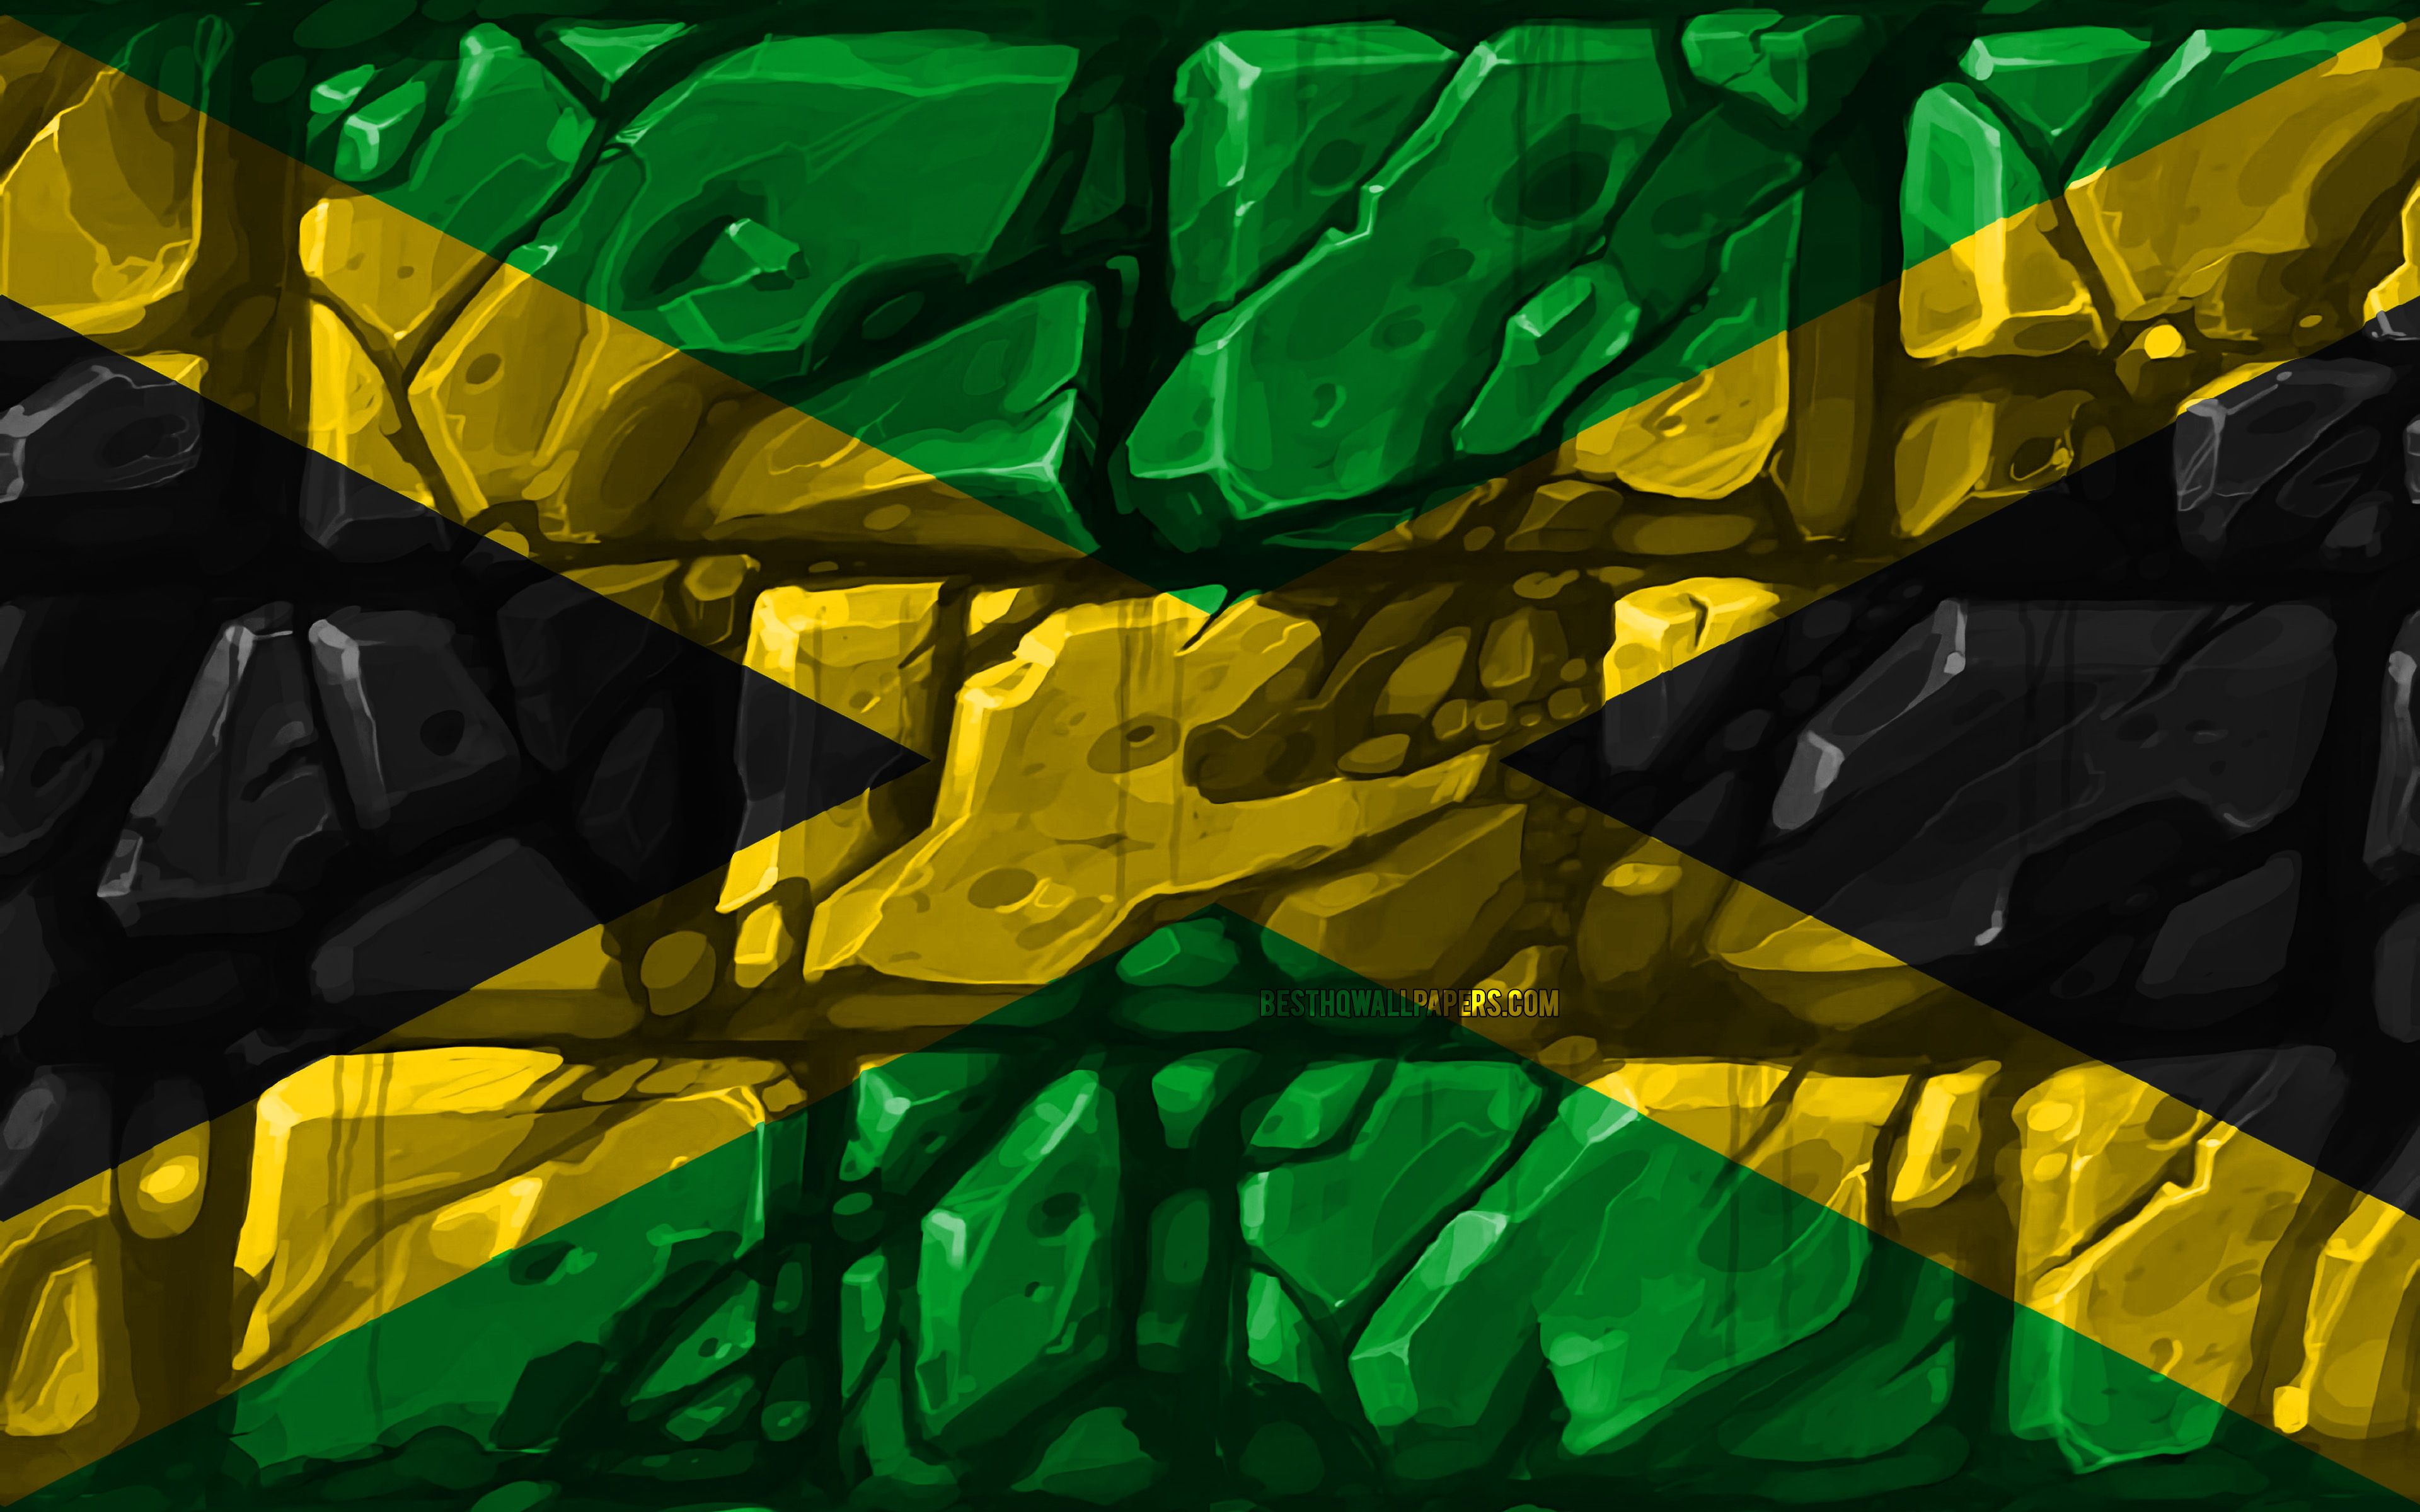 Download wallpaper Jamaican flag, brickwall, 4k, North American countries, national symbols, Flag of Jamaica, creative, Jamaica, North America, Jamaica 3D flag for desktop with resolution 3840x2400. High Quality HD picture wallpaper